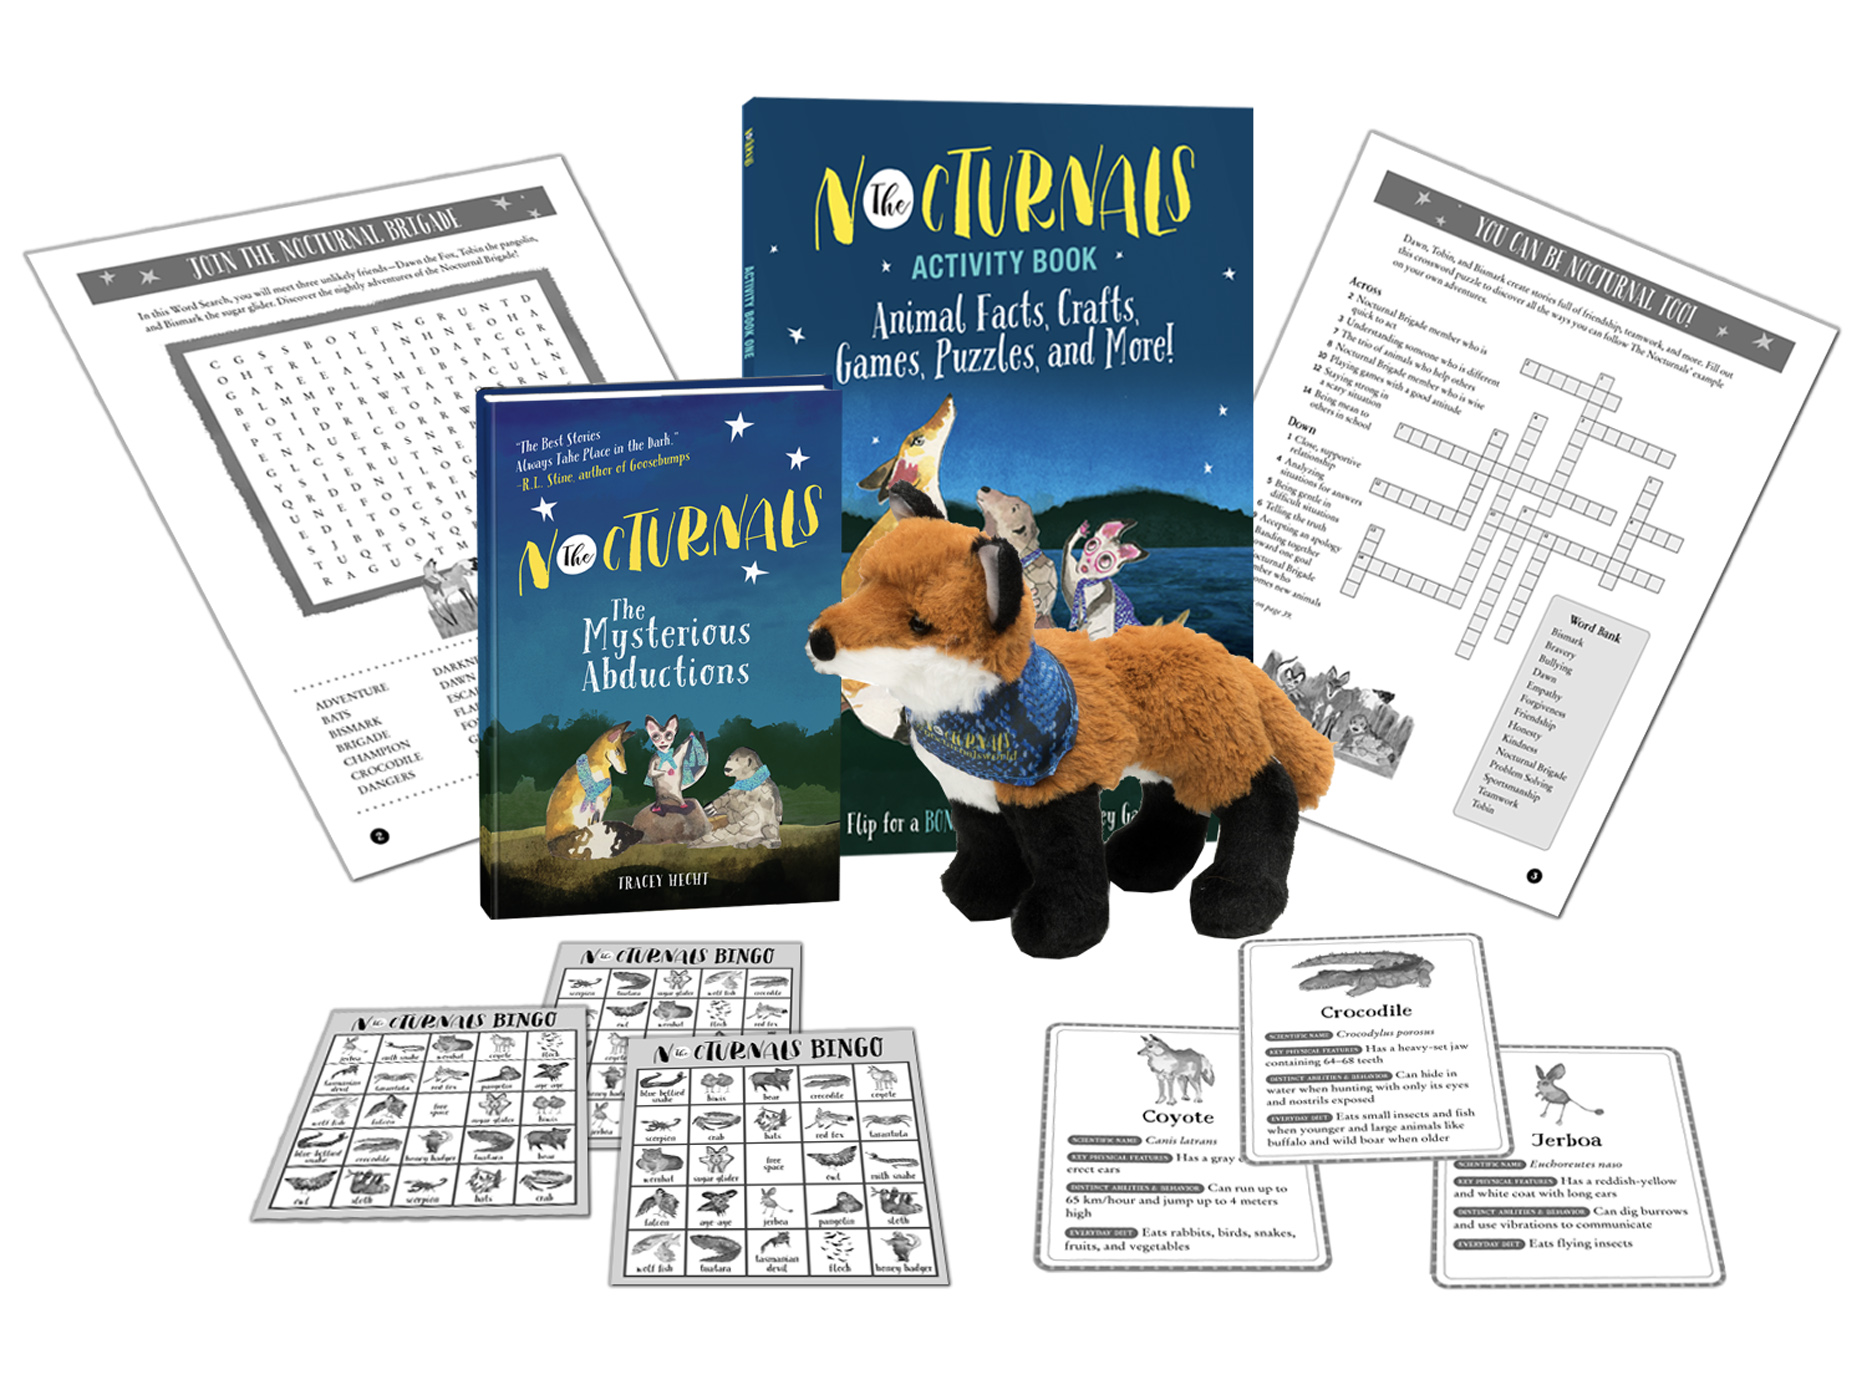 The Nocturnals Adventure Activity Box - Chapter Book, Plush Toy, and Activity Book